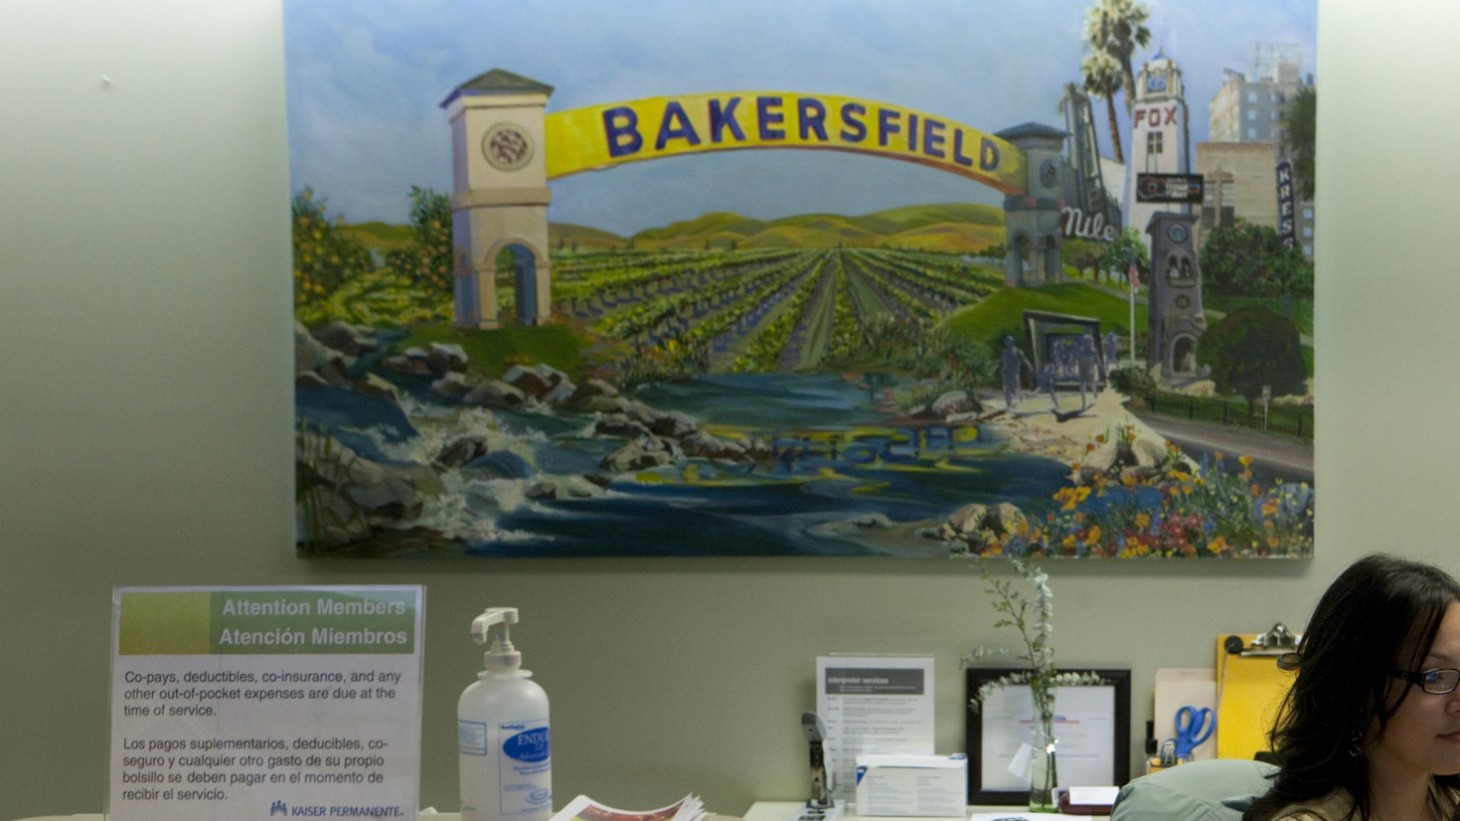 Receptionist at her desk under a painting of Bakersfield